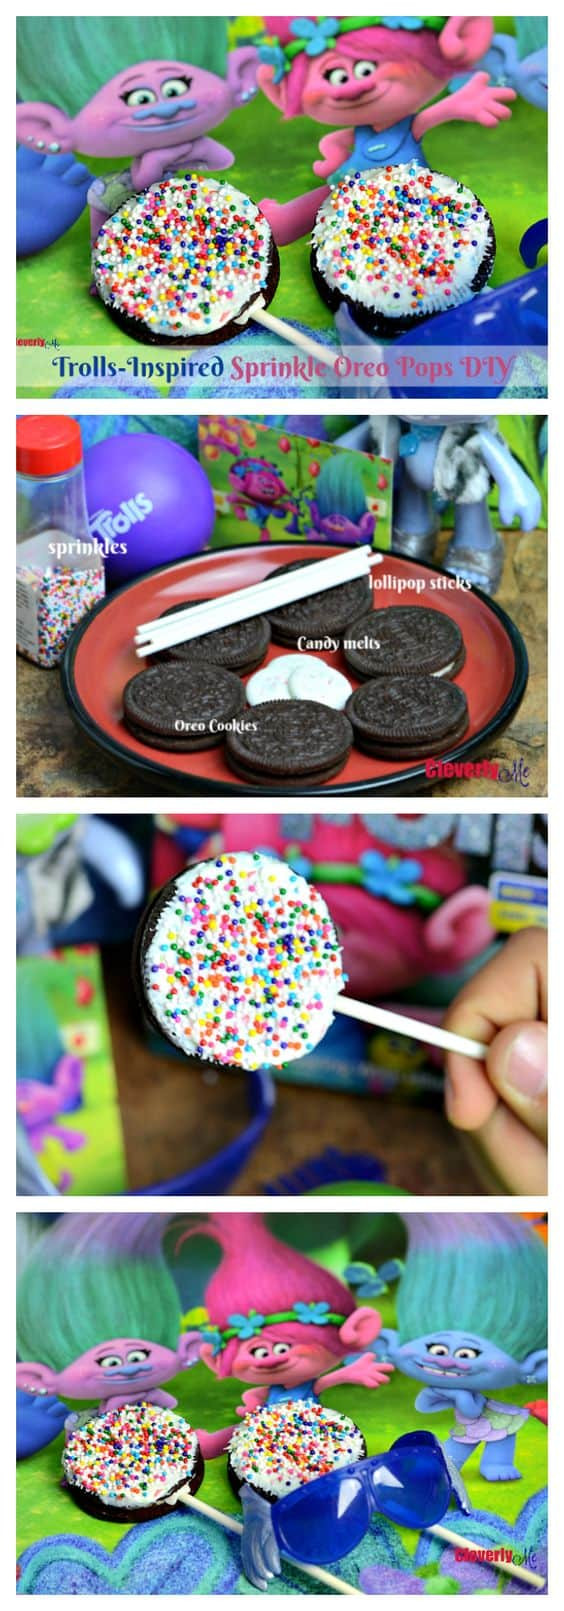 Trolls Food Party Ideas
 How to Throw the Best Trolls Birthday Party Cha Ching Queen